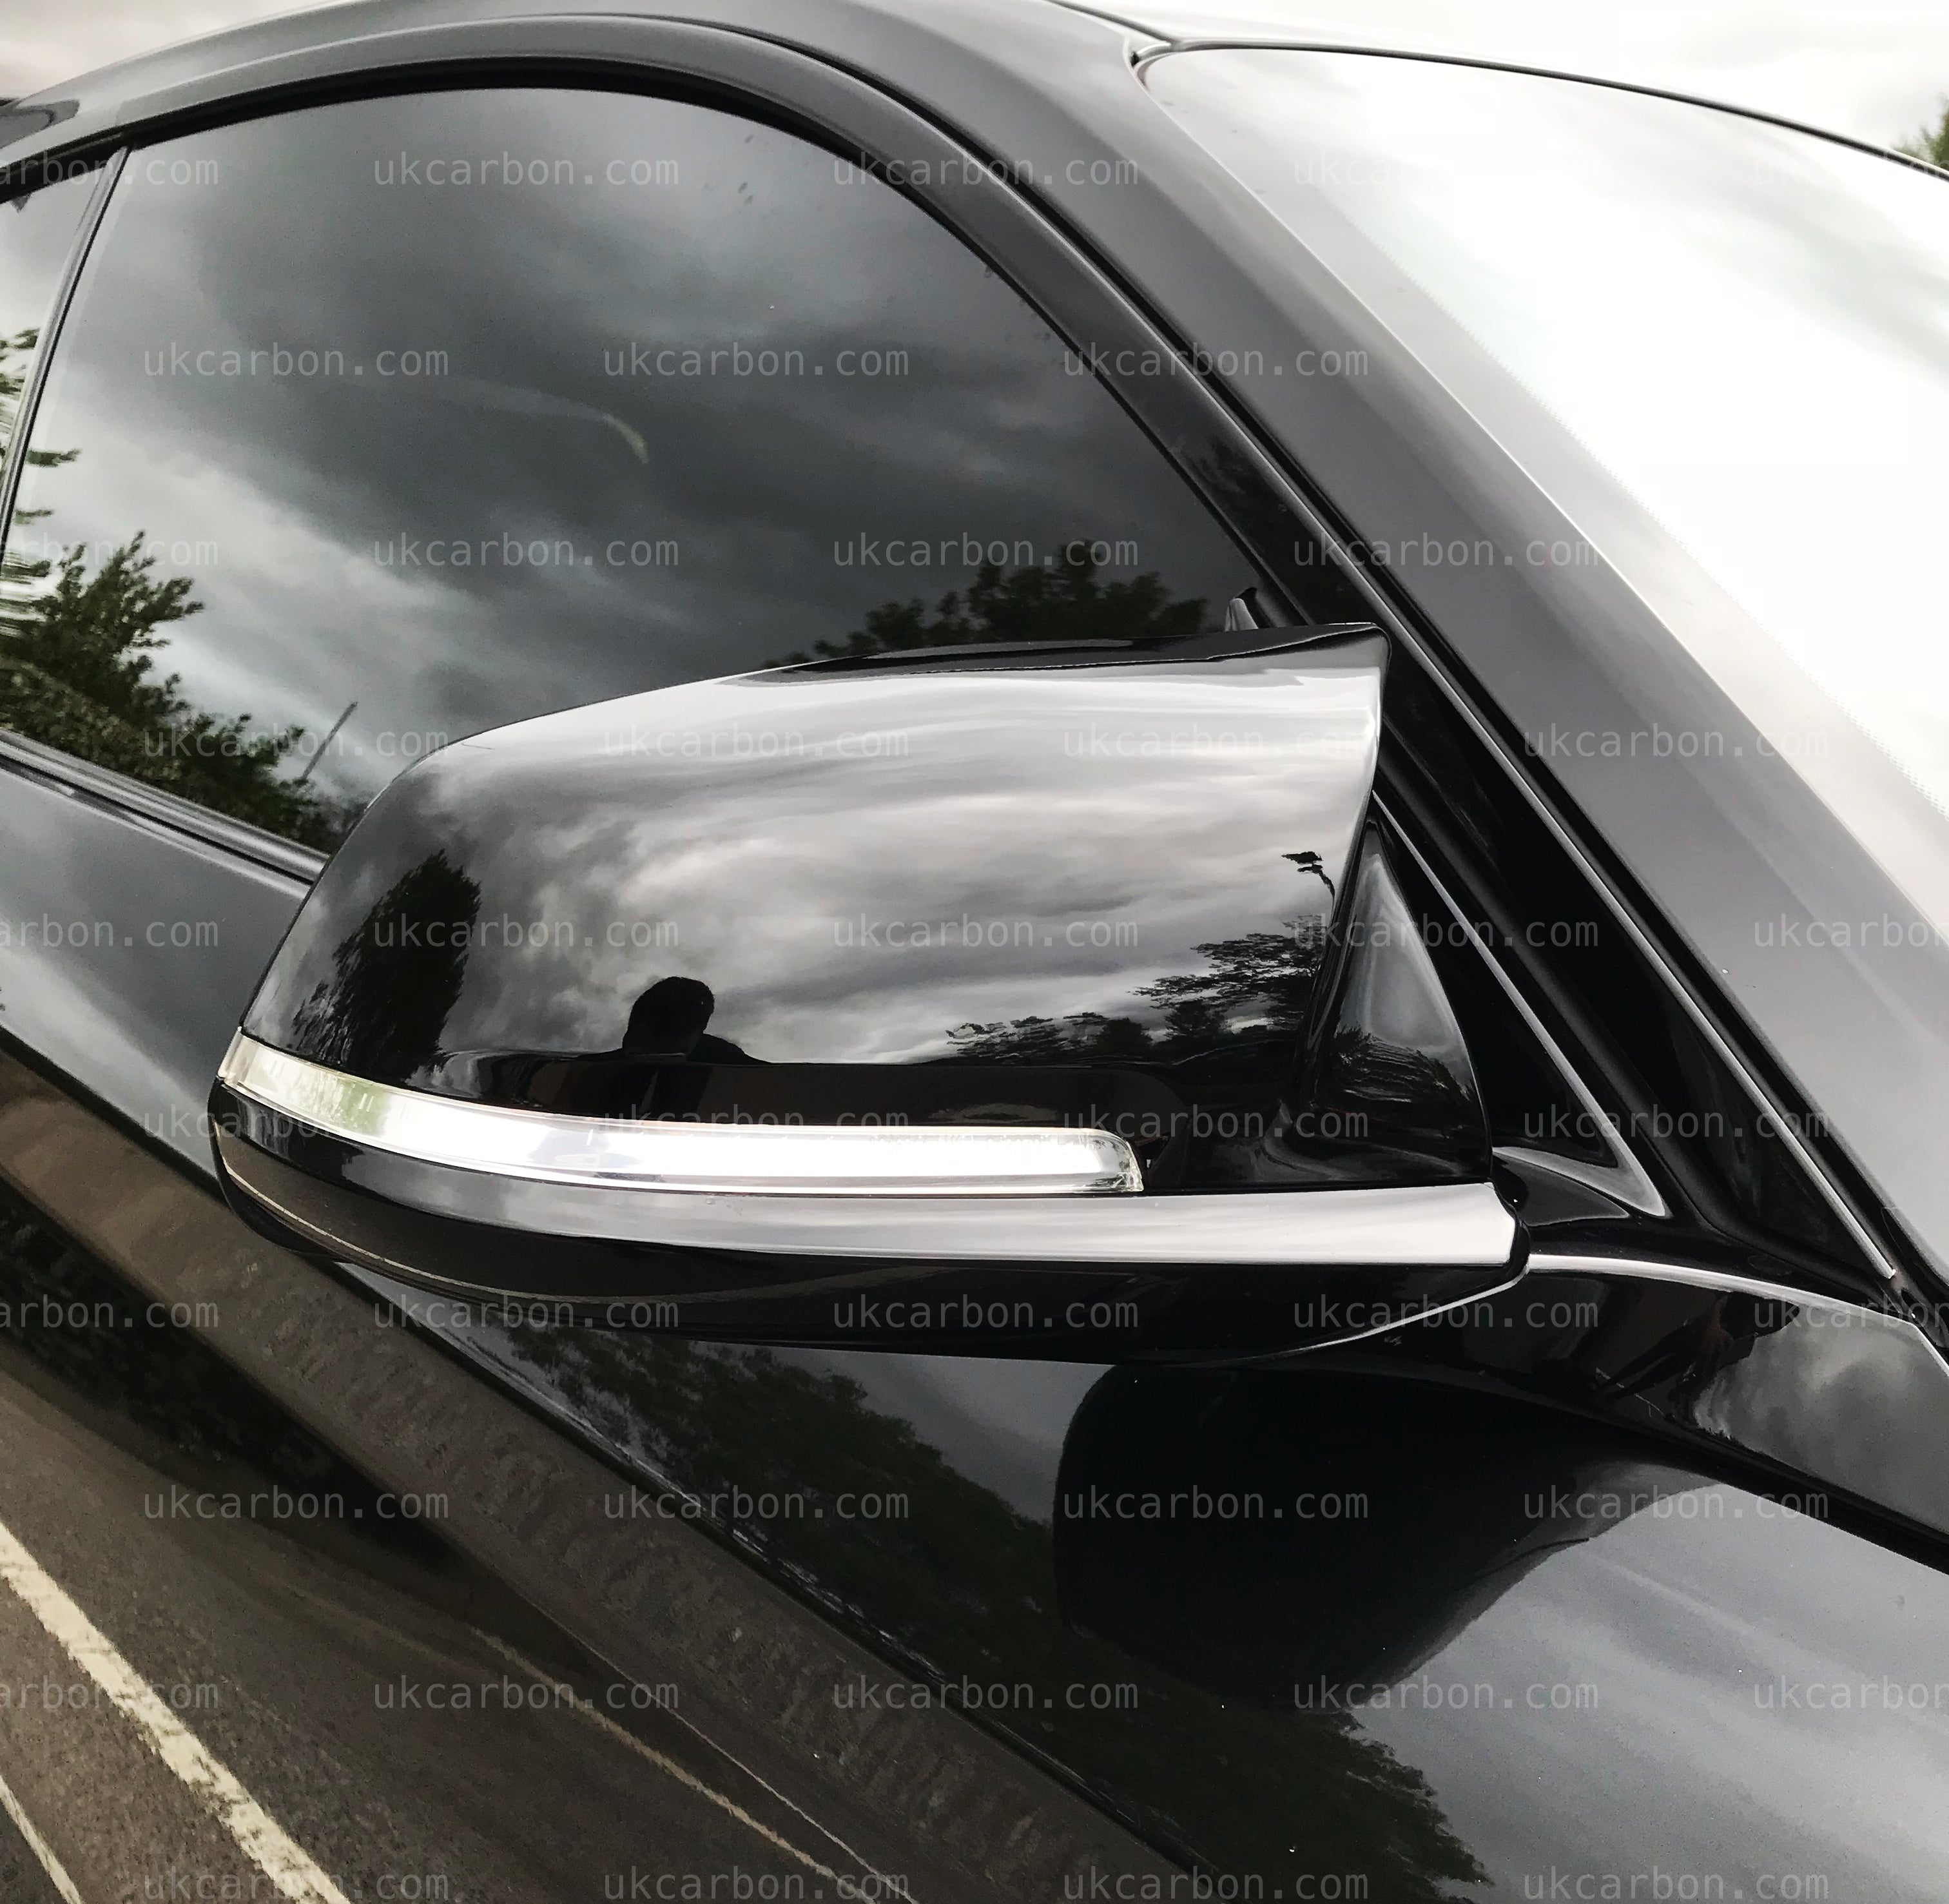 BMW 2 Series Gloss Black M Style Wing Mirror Cover Replacements F22 by UKCarbon